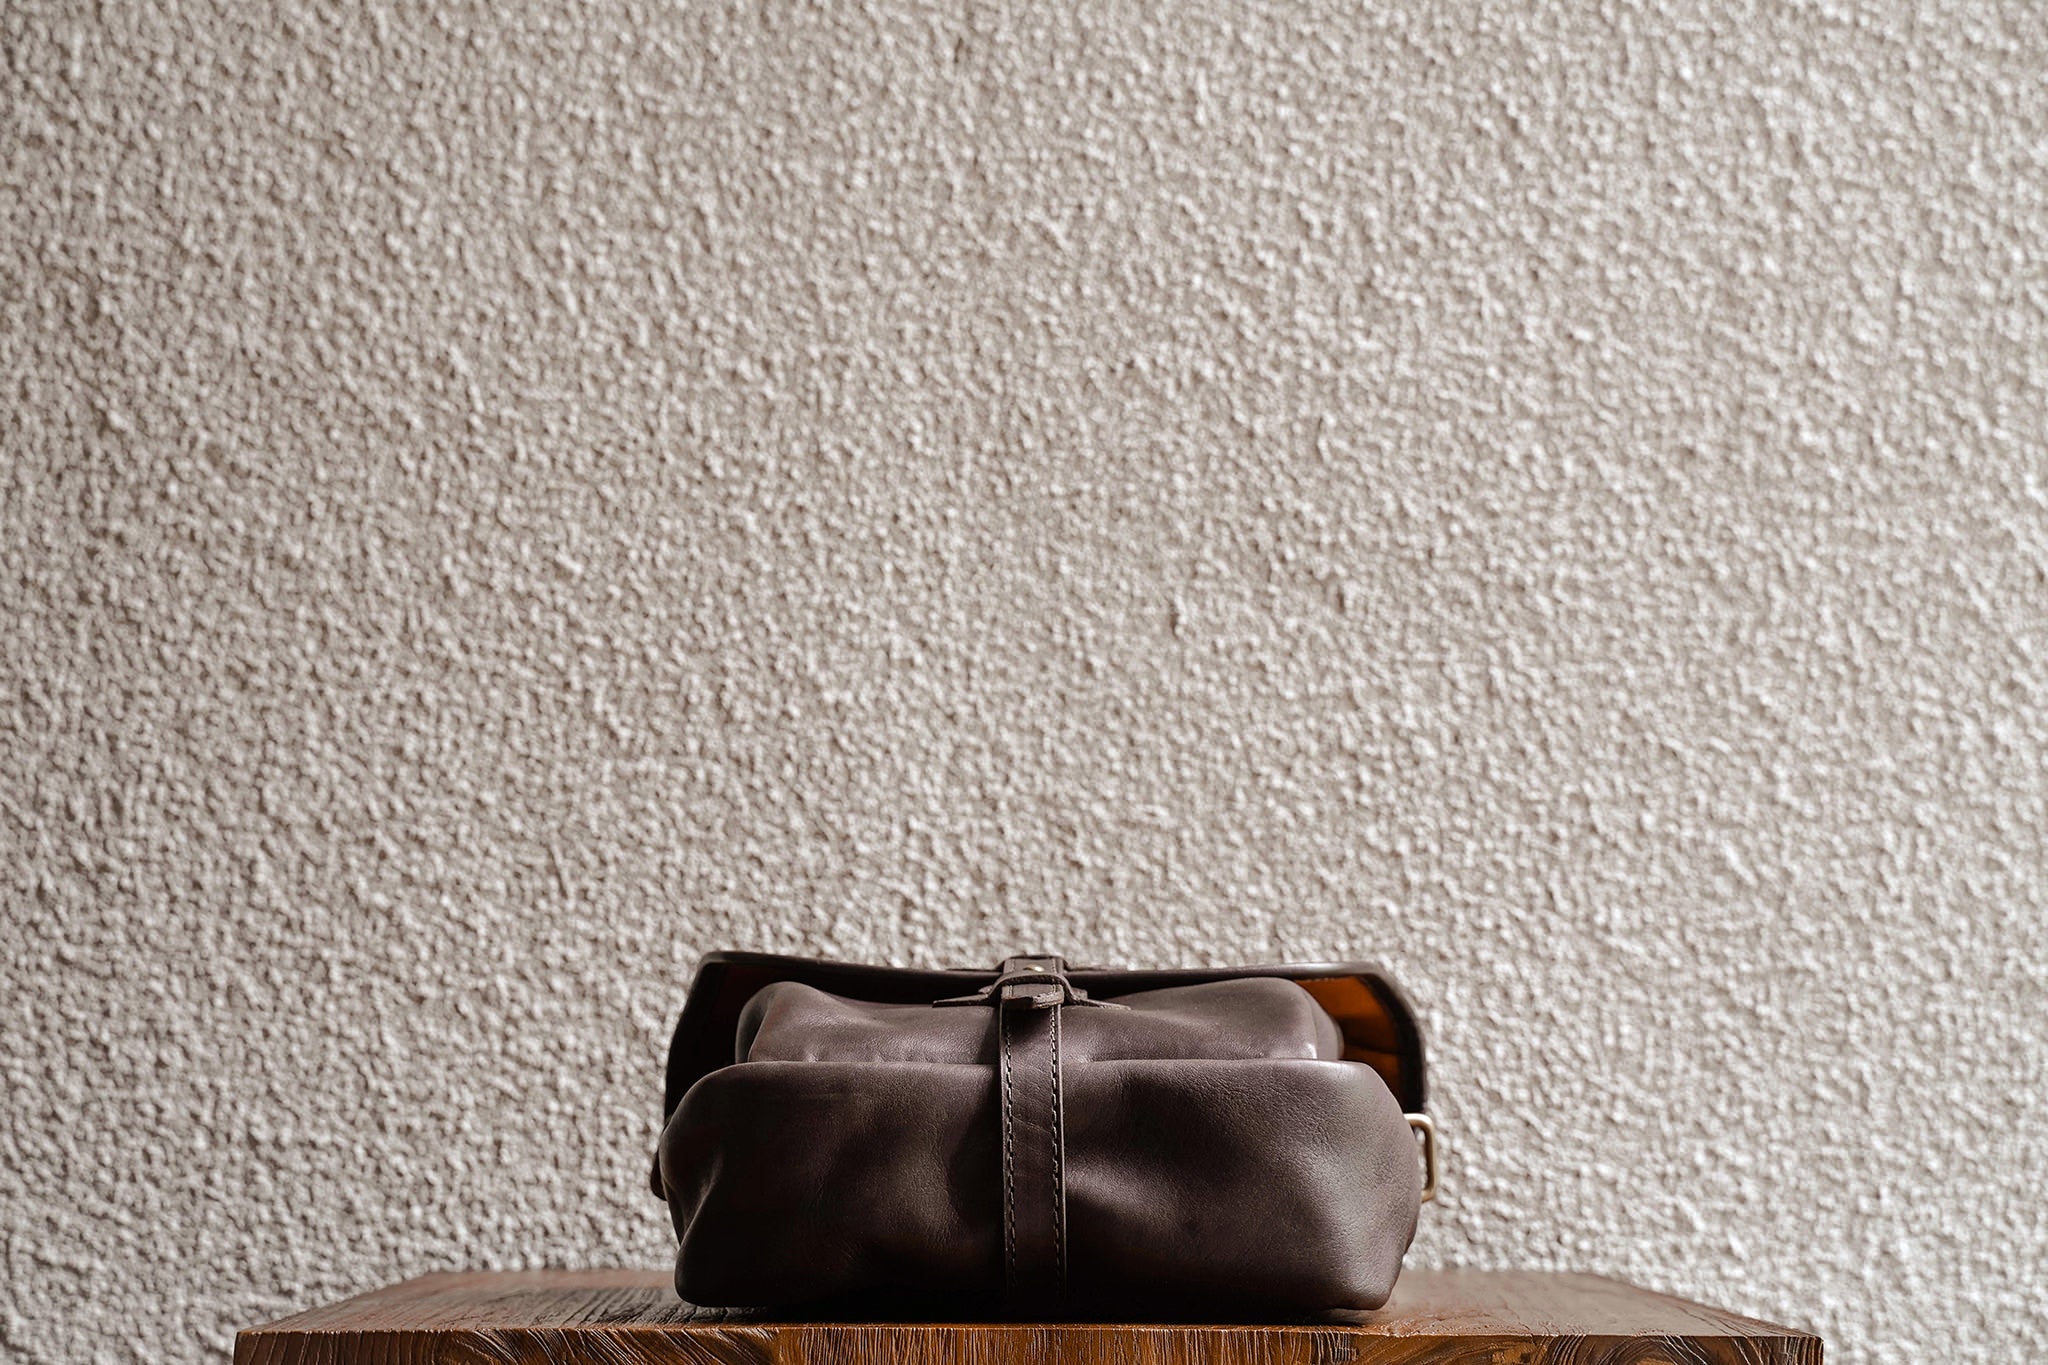 One of our signature design cues, the body strap goes all around the bag, providing a load bearing structure for the bag. Keeping with the goal to minimize seams, the sides and bottom are made from one big piece of leather.